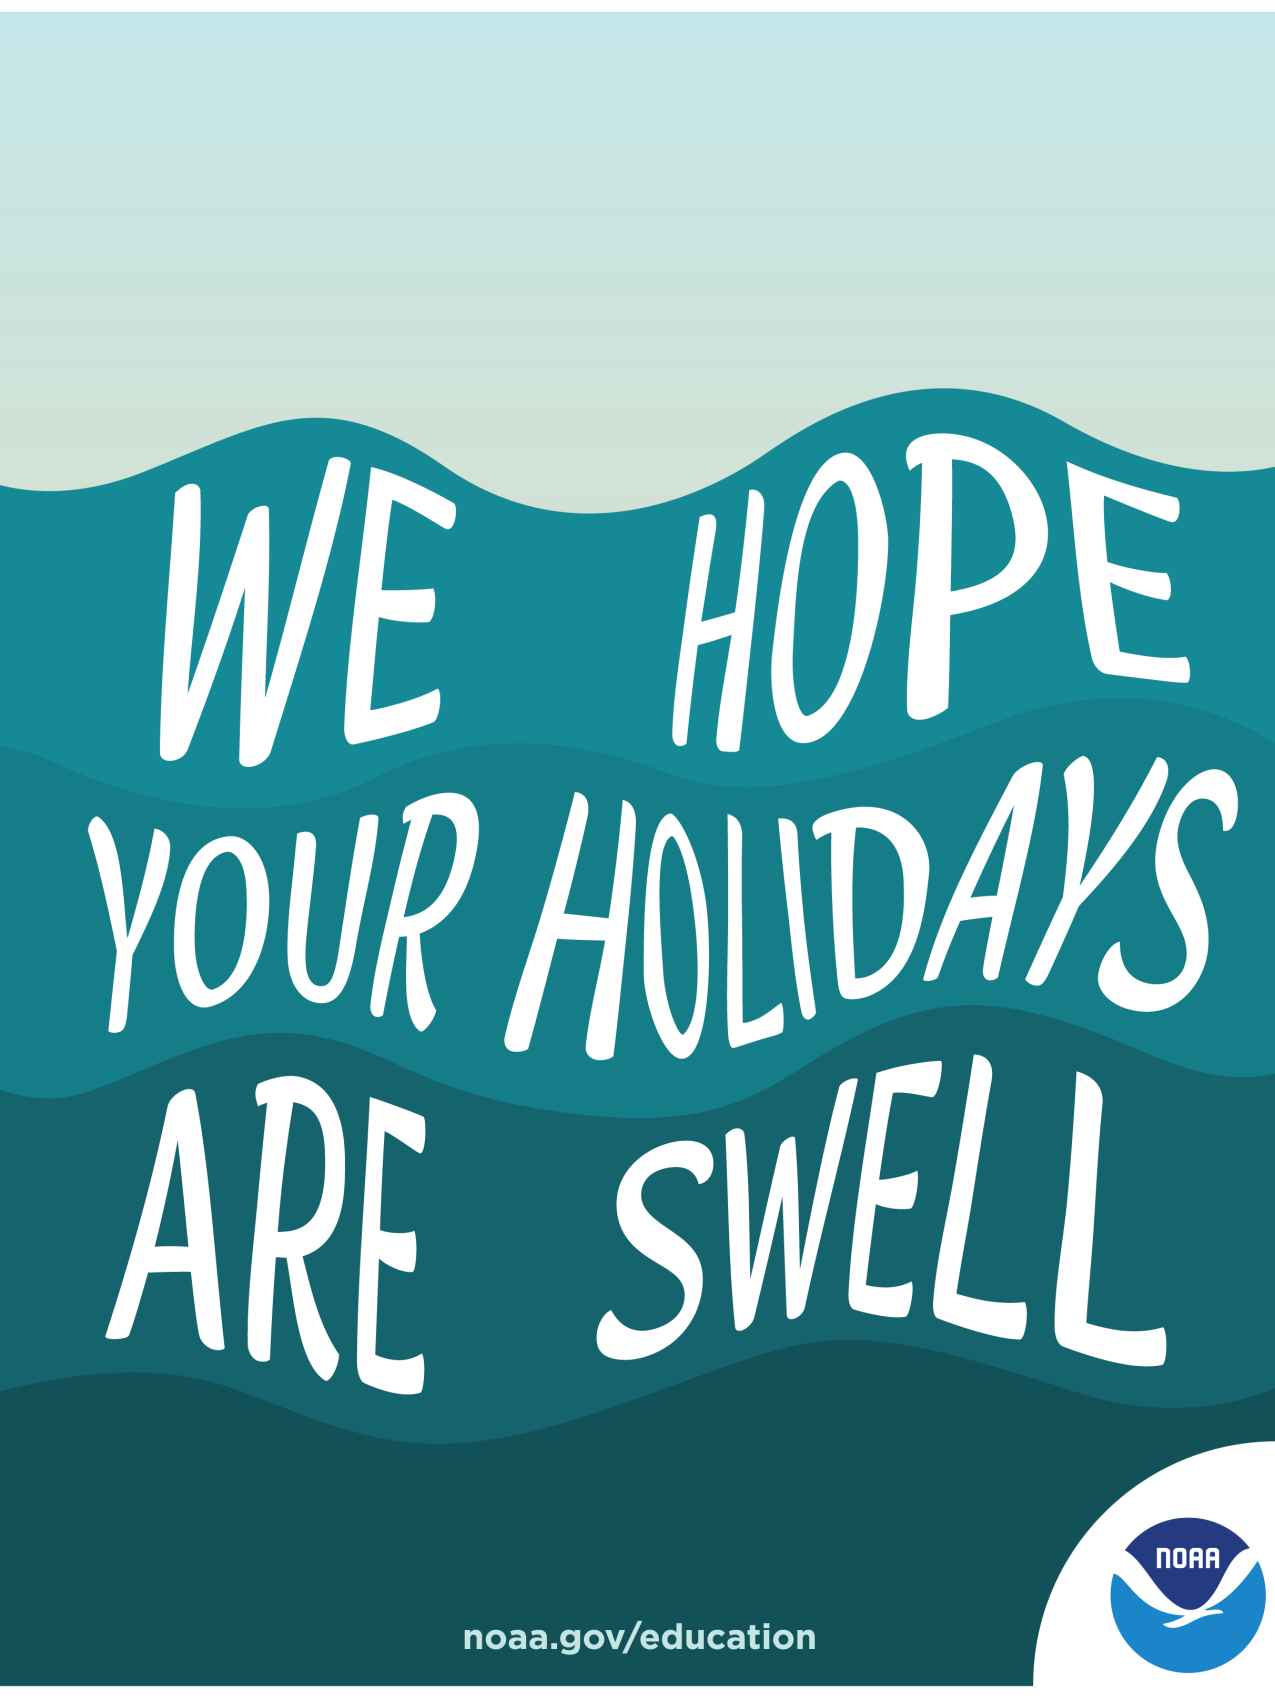 An illustrated holiday card featuring waves in the sea. There is a NOAA logo in the corner of the card, and the text is distorted to look like it is following the swell of the waves. Text: We hope your holidays are swell! noaa.gov/education 